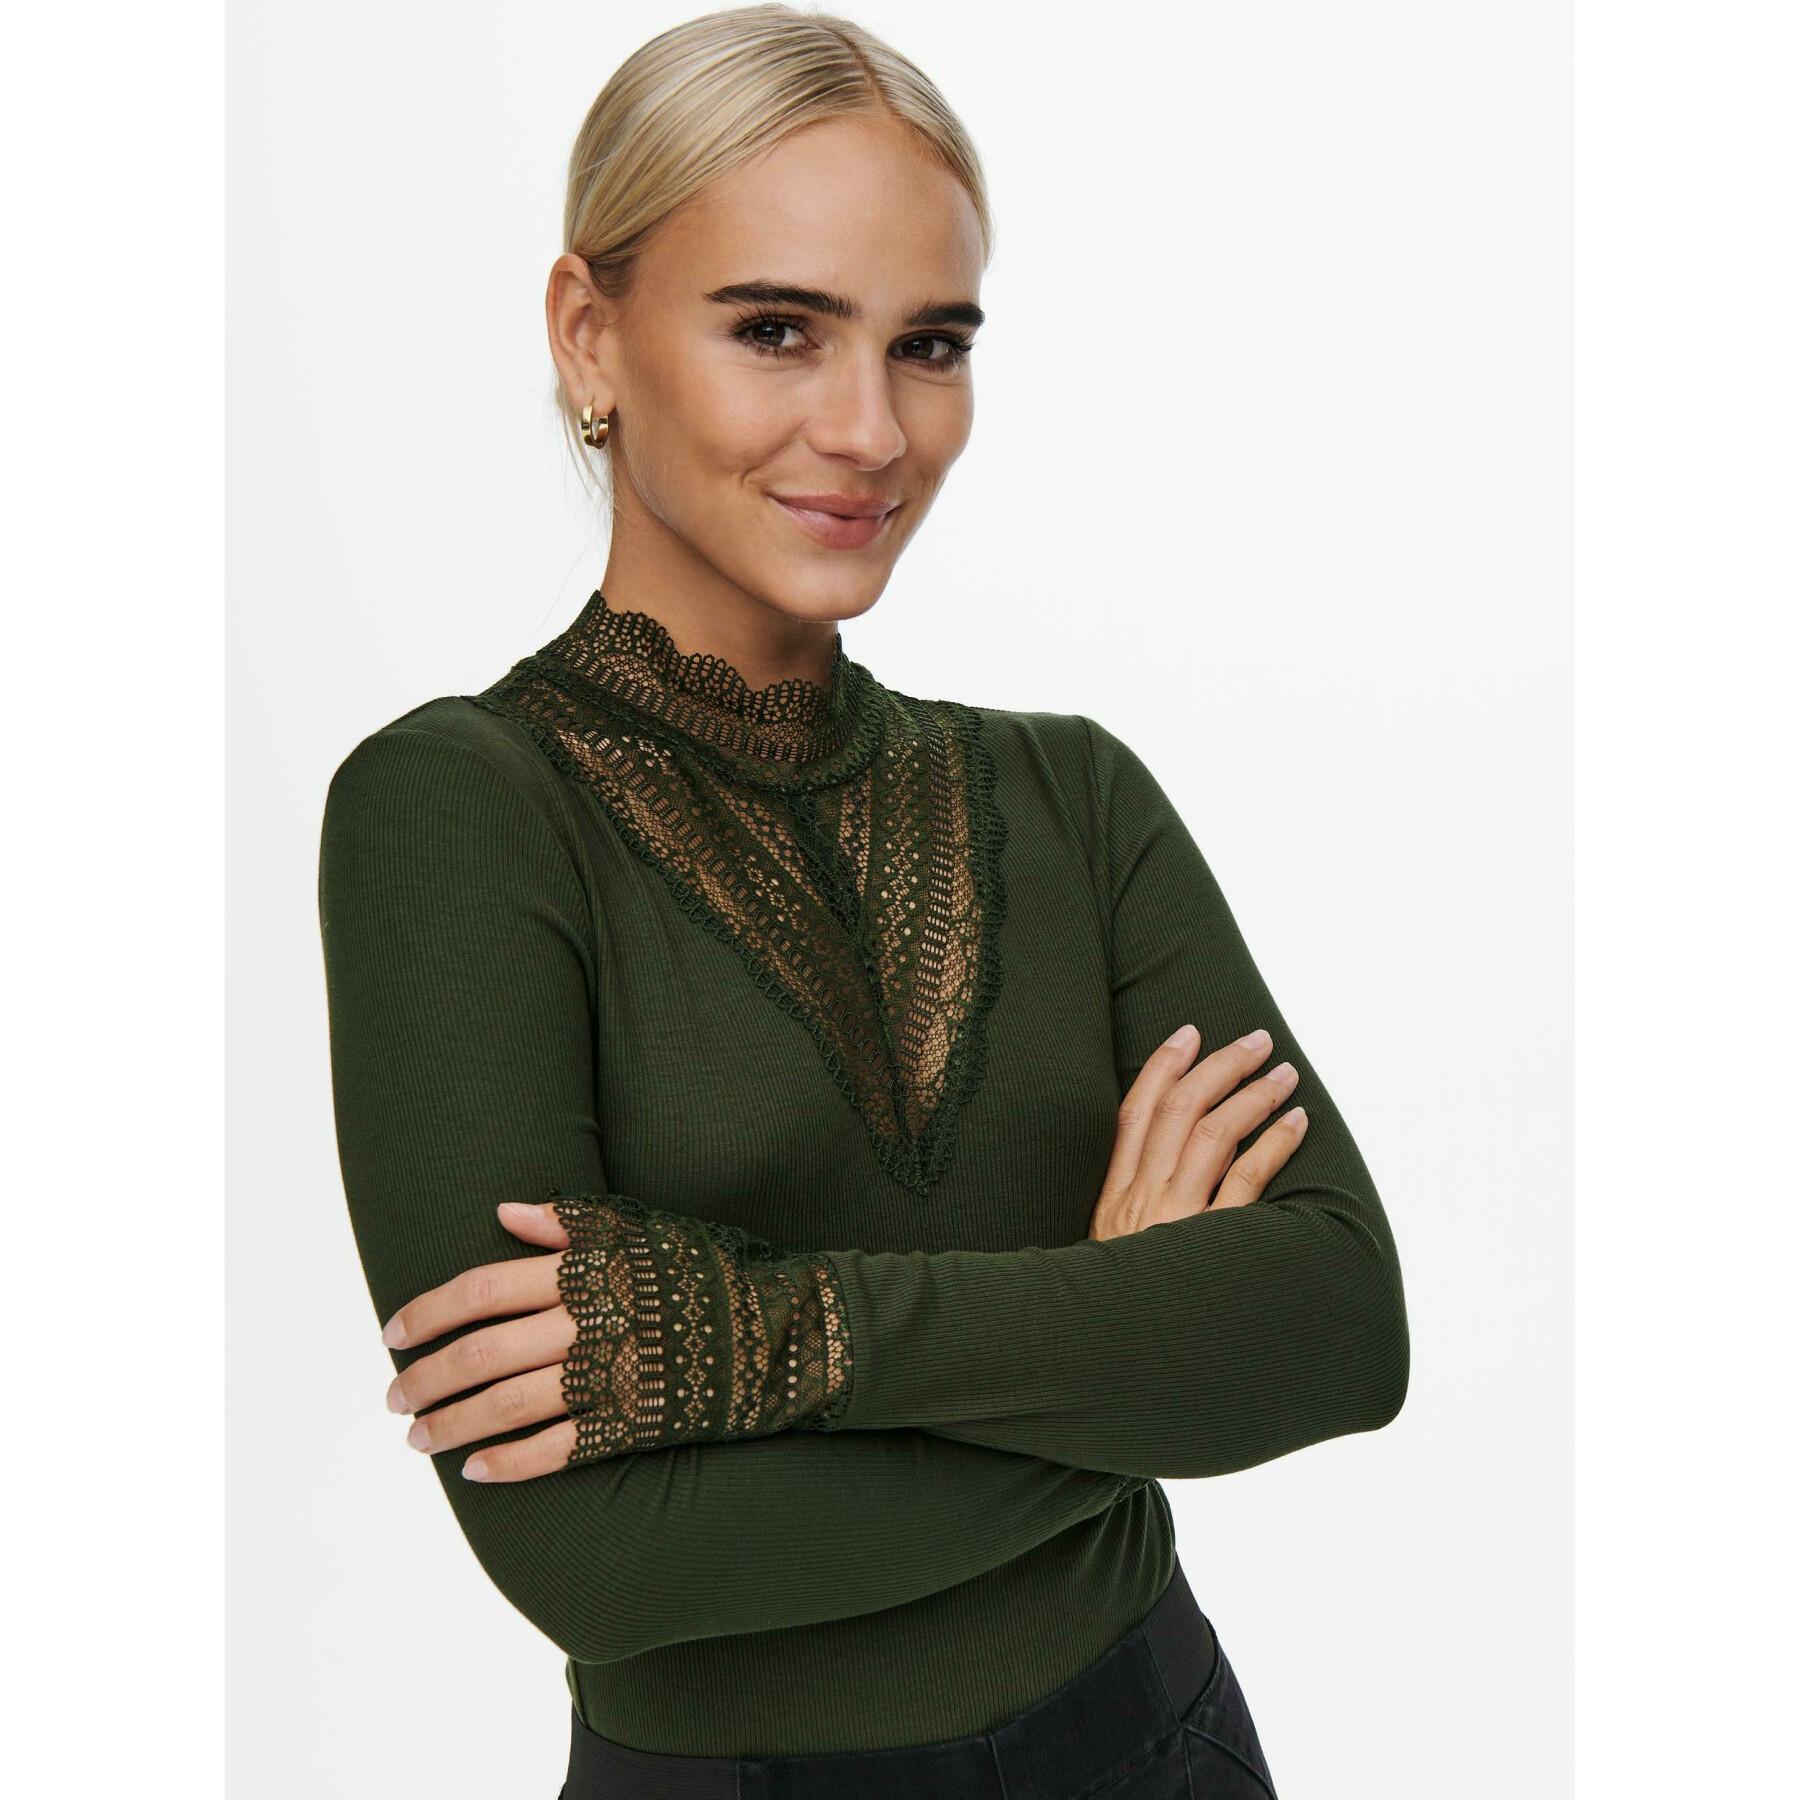 Top de mujeres Only Tilde manga larga col montant lace